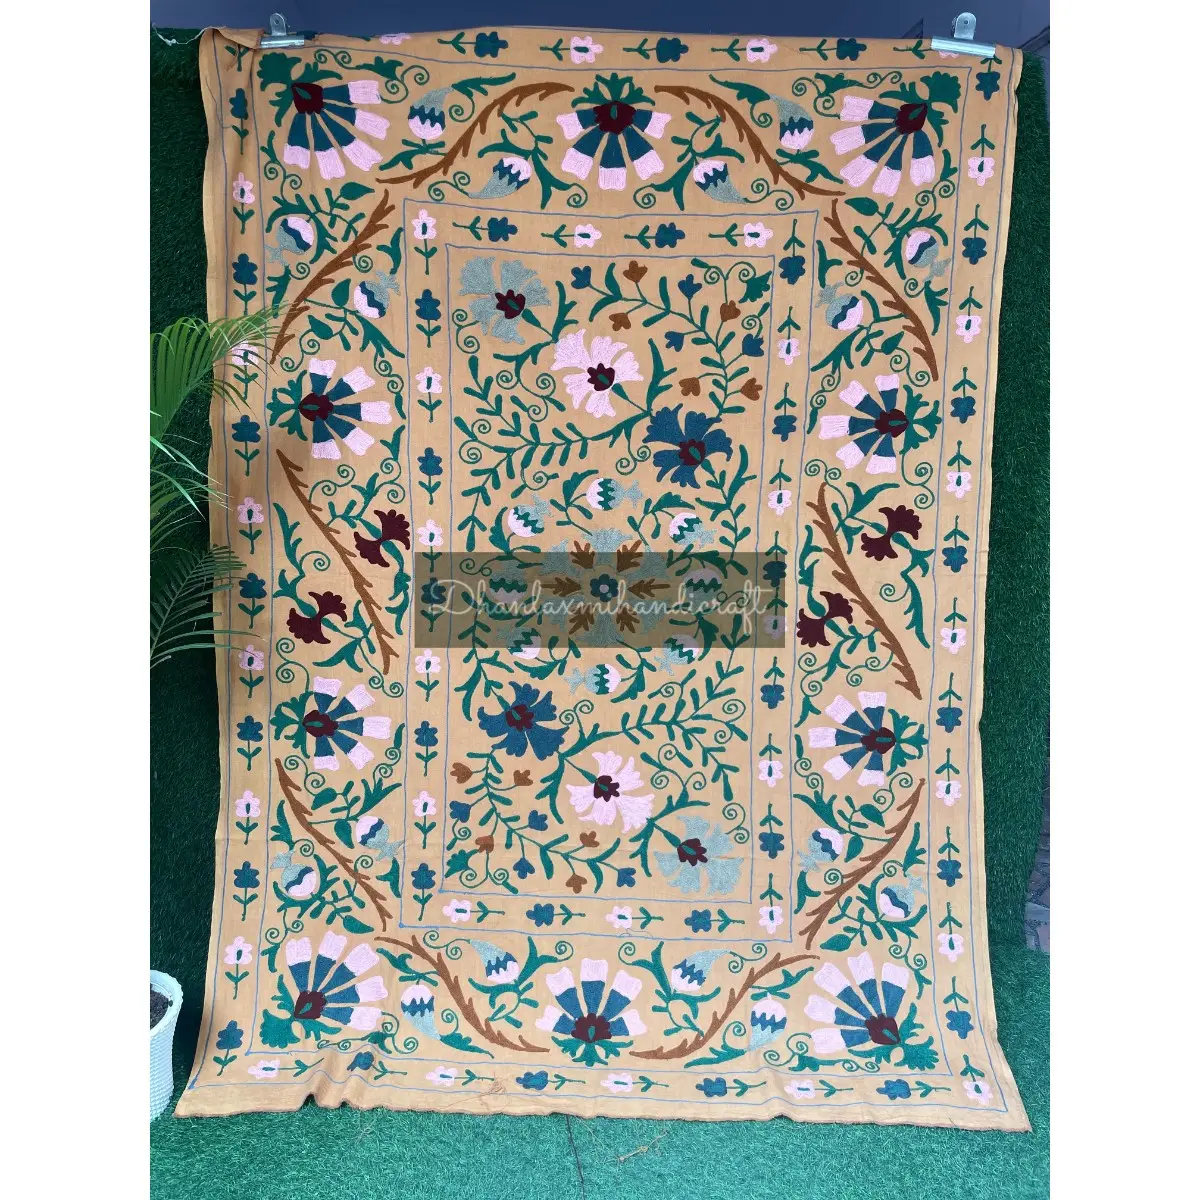 Handmade Cotton Suzani Quilt With Beautiful Hand Embroidery Sustainable Home Decor Bedspread For Office Or Living Room